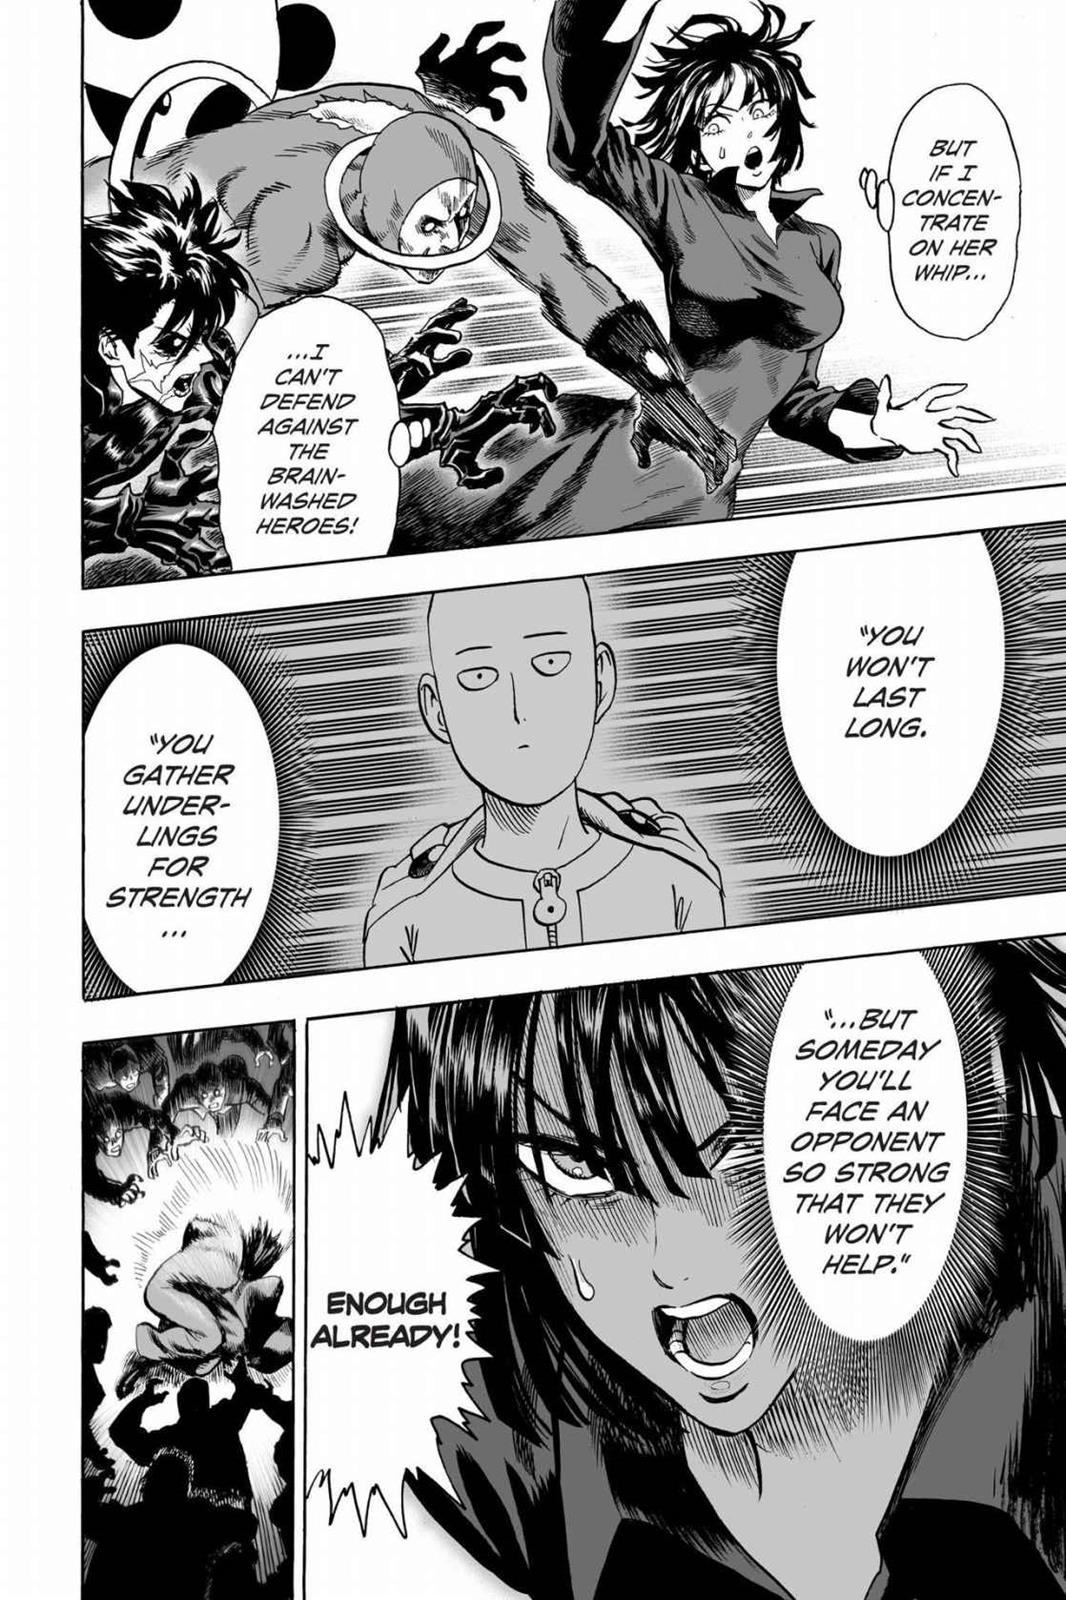 One-Punch Man, Punch 64 image 31